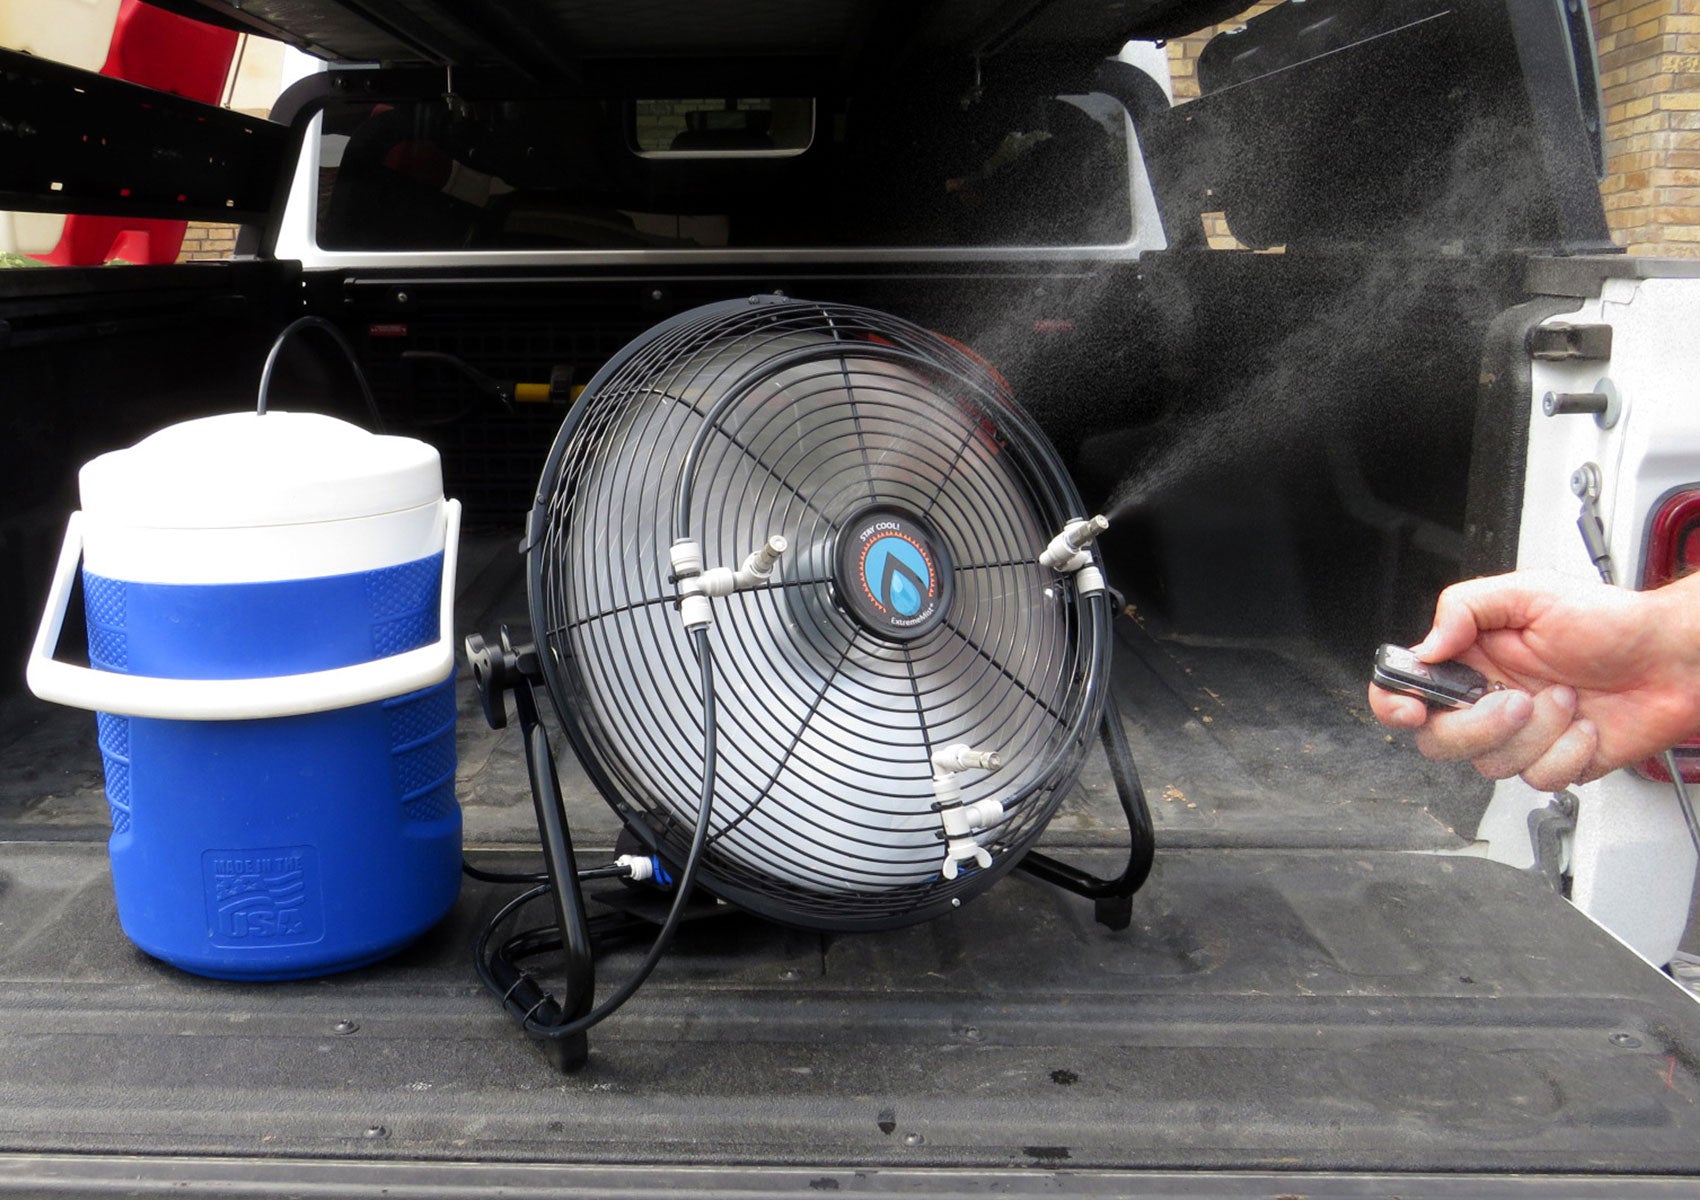 misting fan with water cool and wireless remote in truck bed